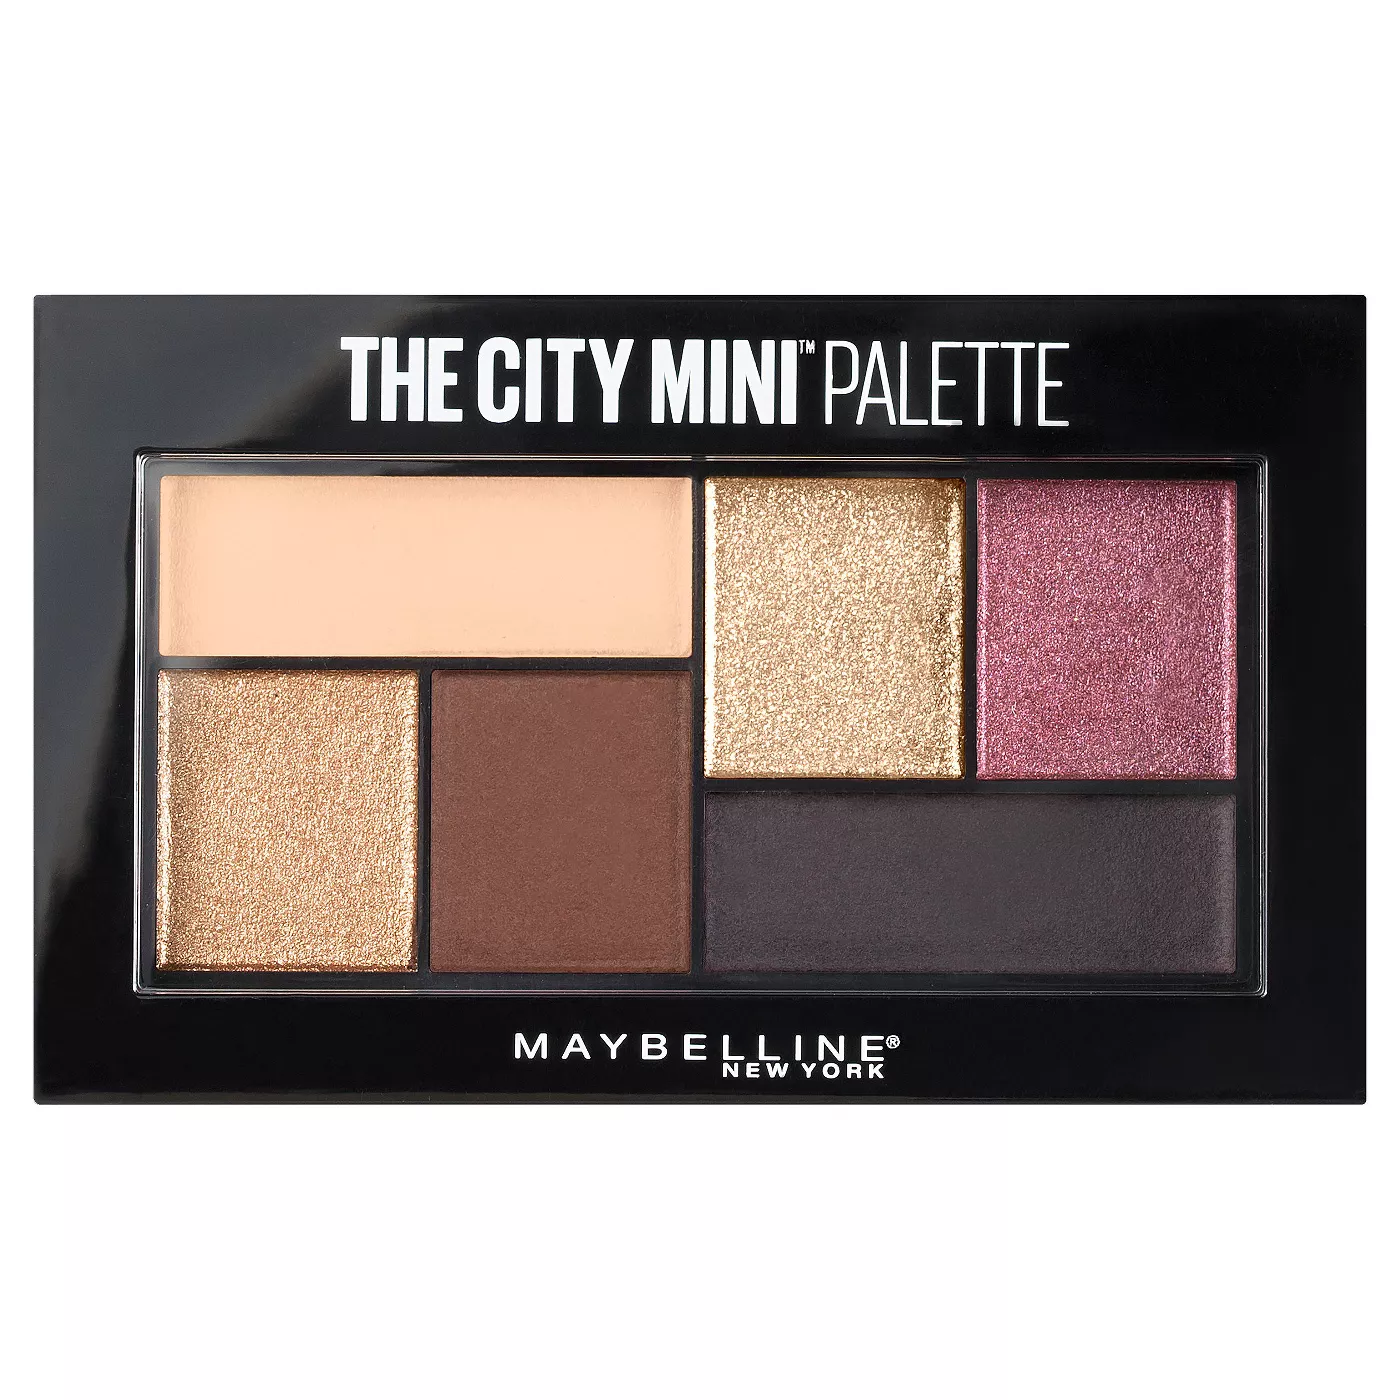 Maybelline City Mini Eyeshadow Palettes is a great drugstore beauty product